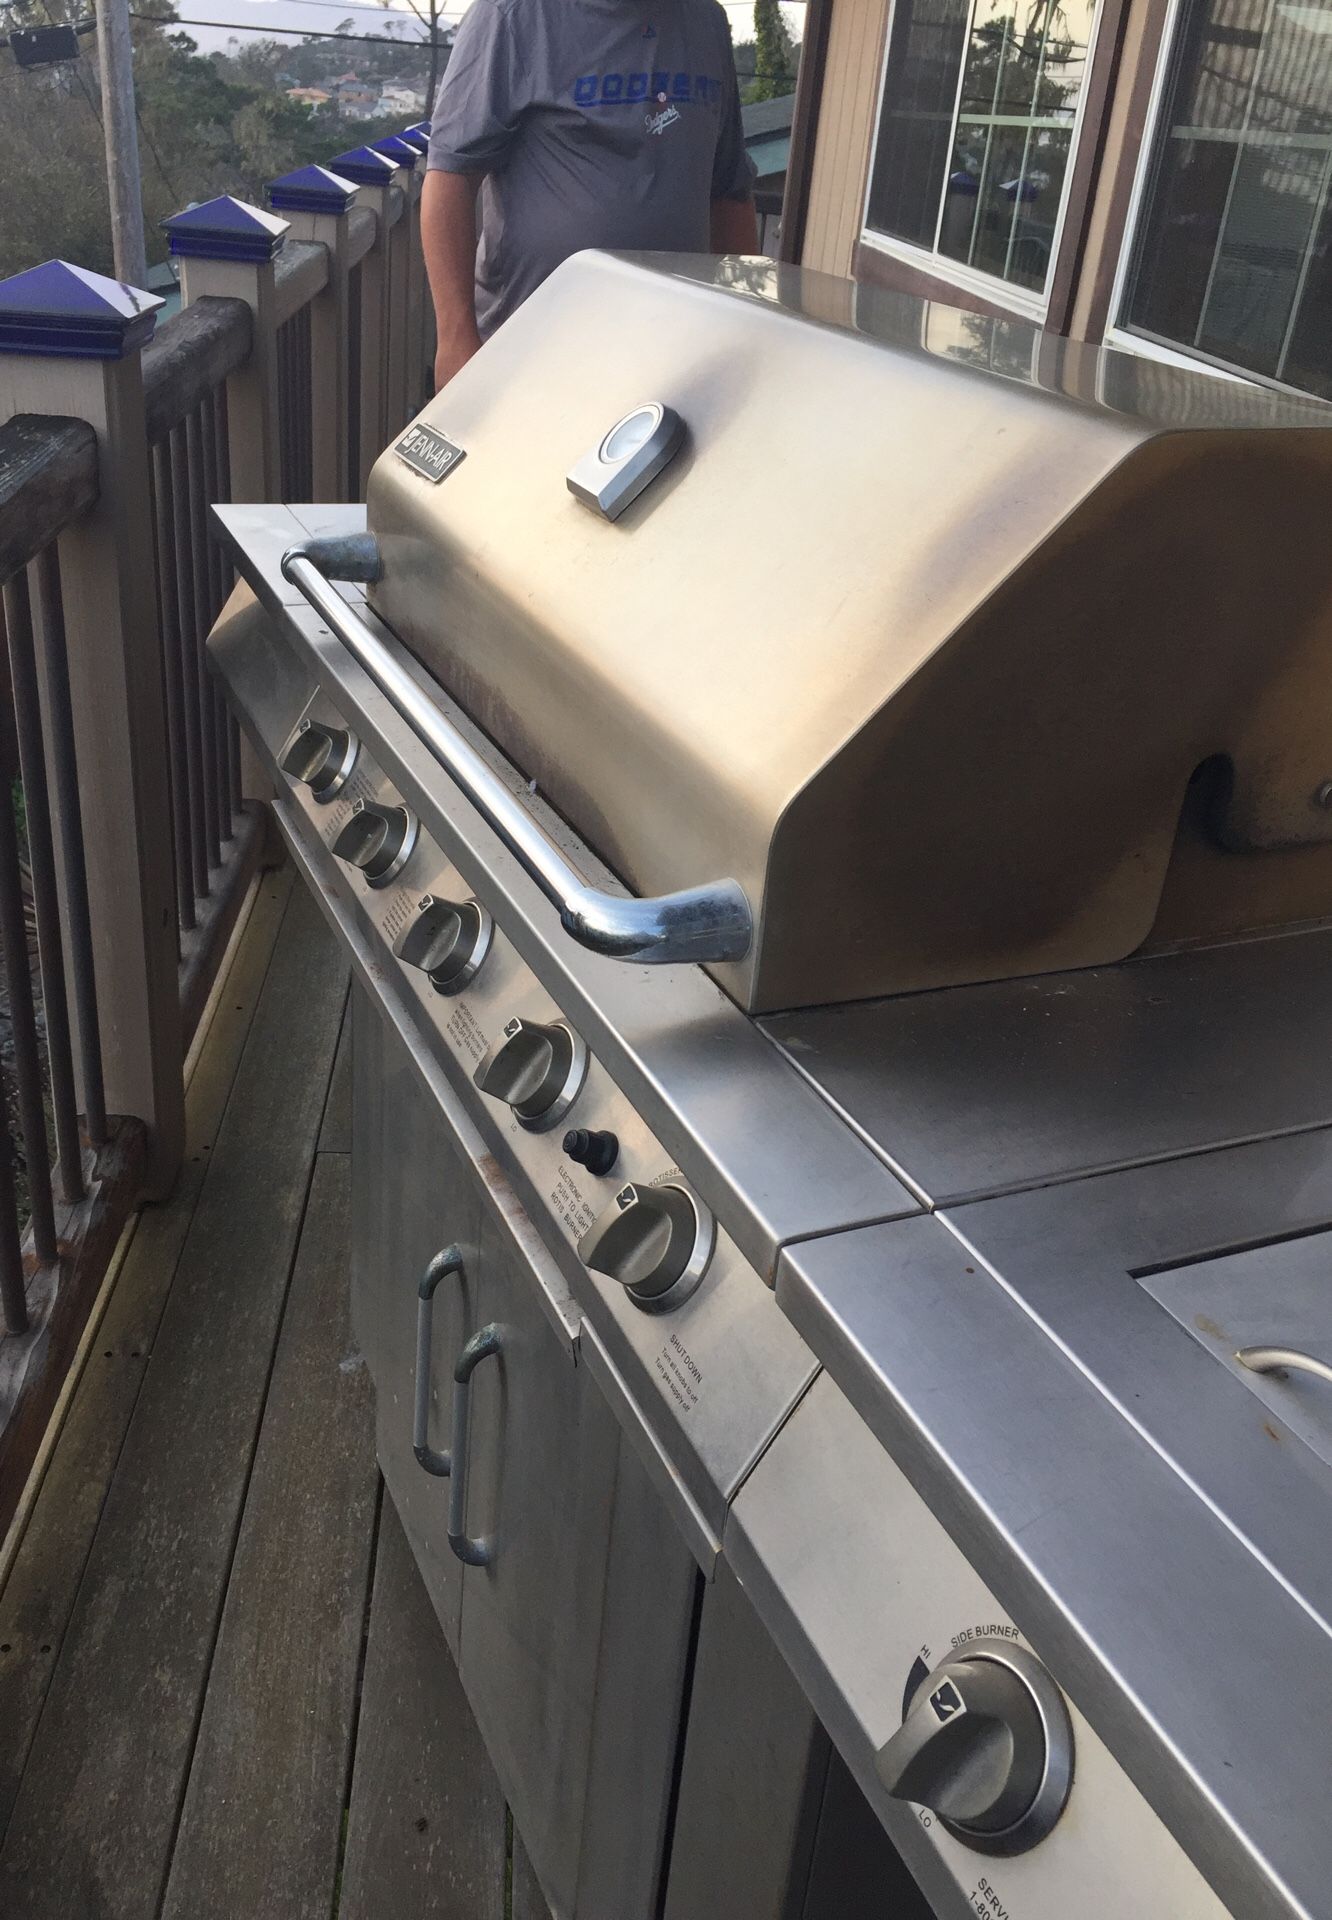 Jenn Air bbq was 849 new selling 50 in cambria text {contact info removed}